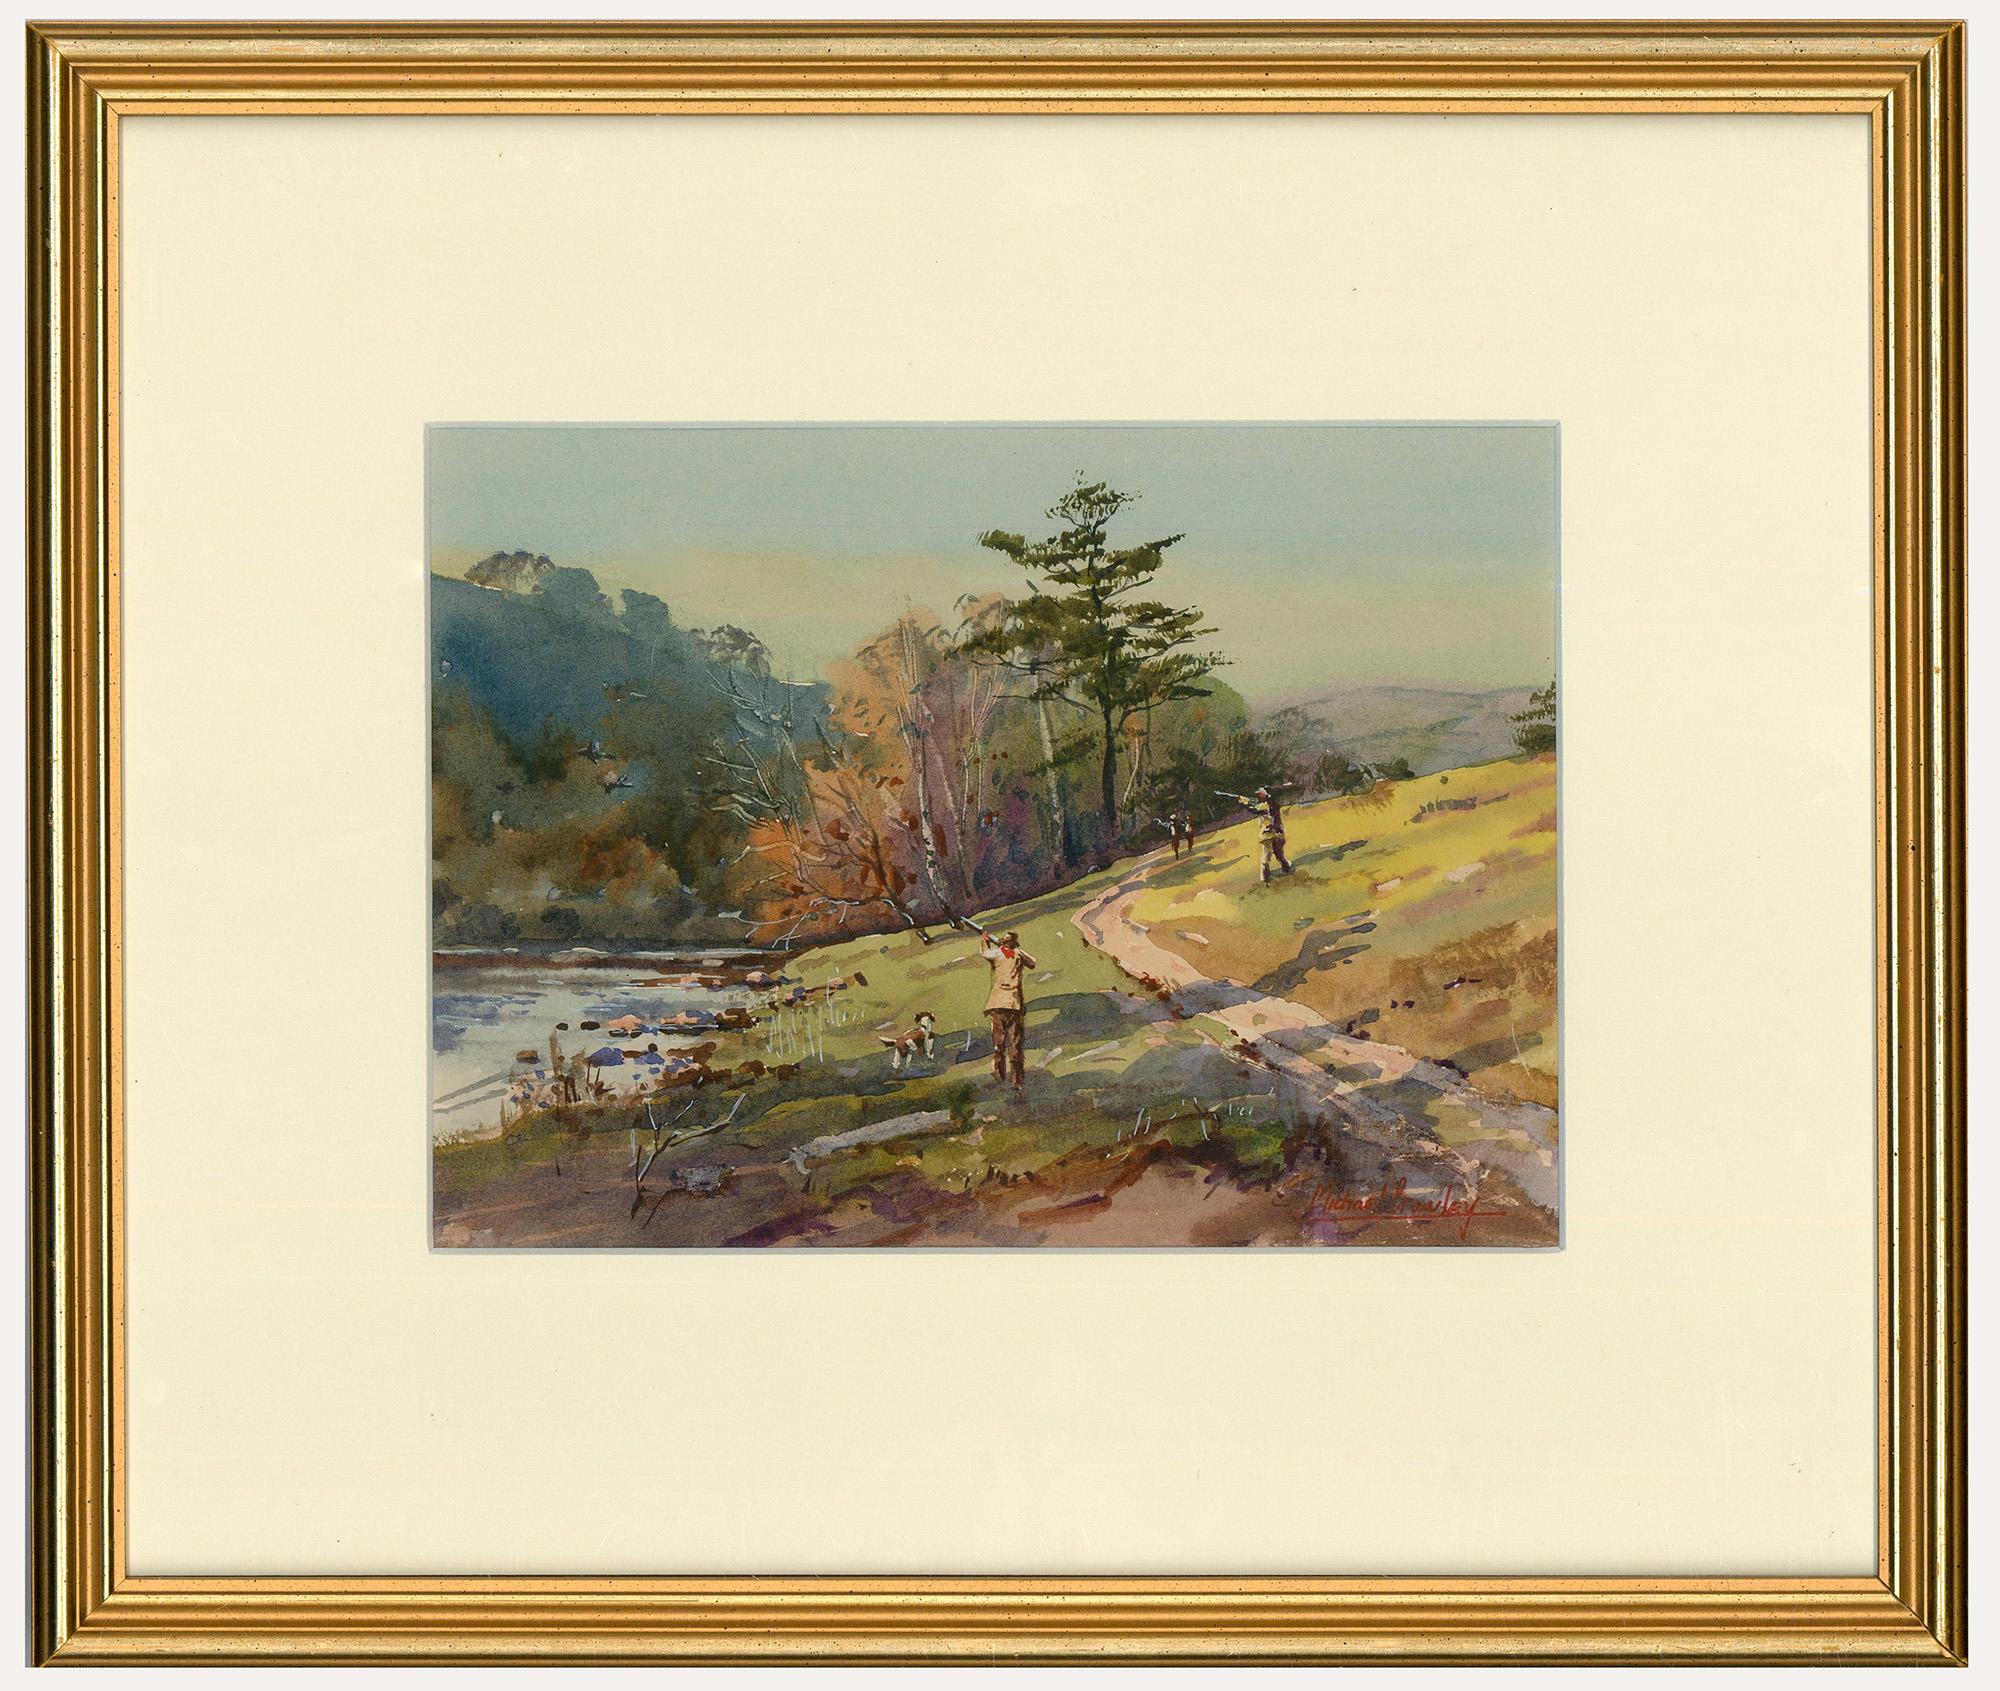 Unknown Landscape Art - Michael Crawley - Frame 20th Century Watercolour, The Shoot, Manifold Valley